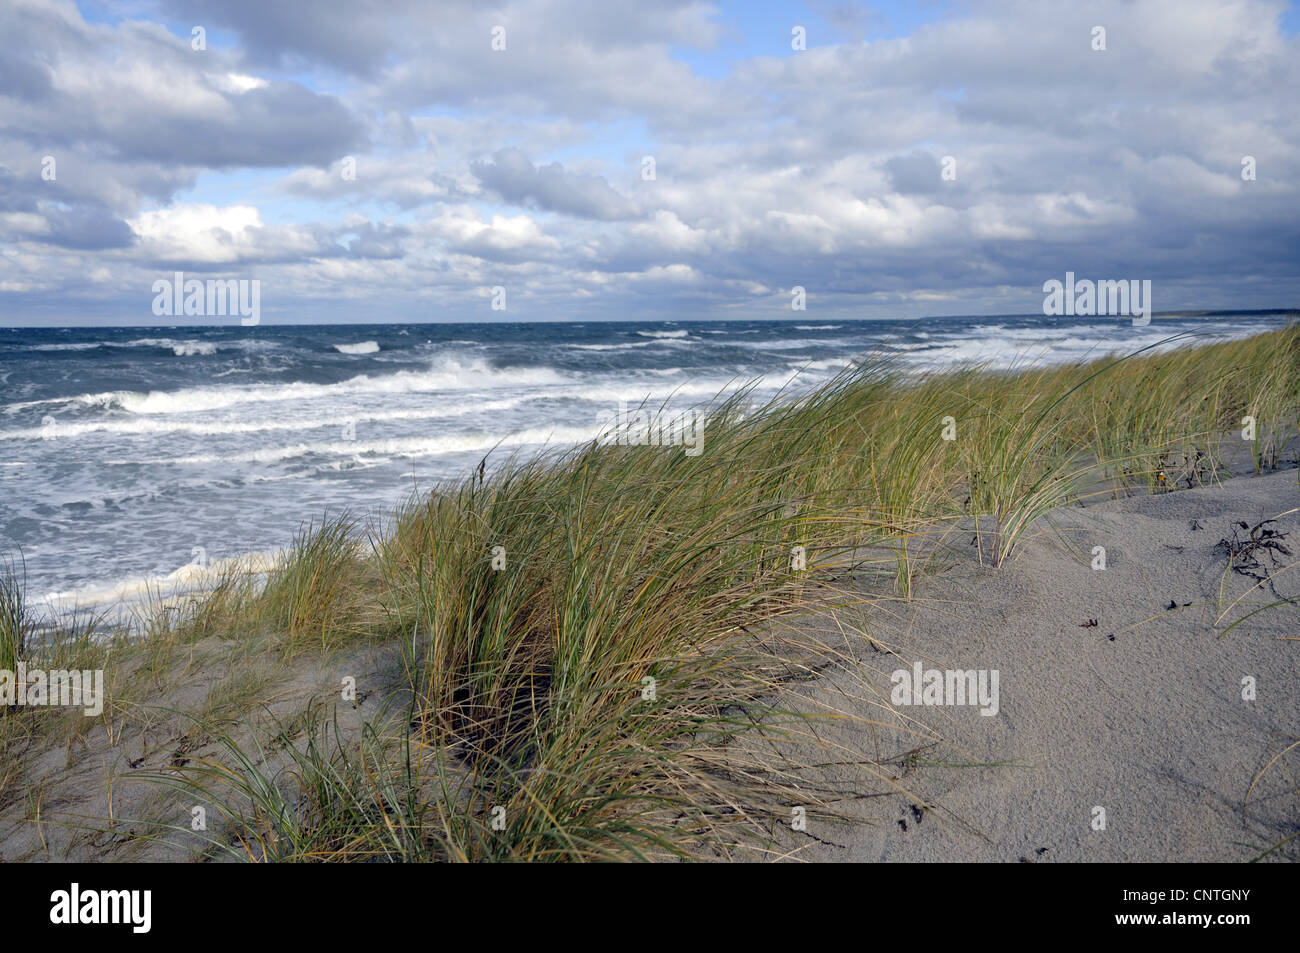 view over a dune at the open sea, Germany, Mecklenburg Vorpommern, Western Pomerania Lagoon Area National Park Stock Photo